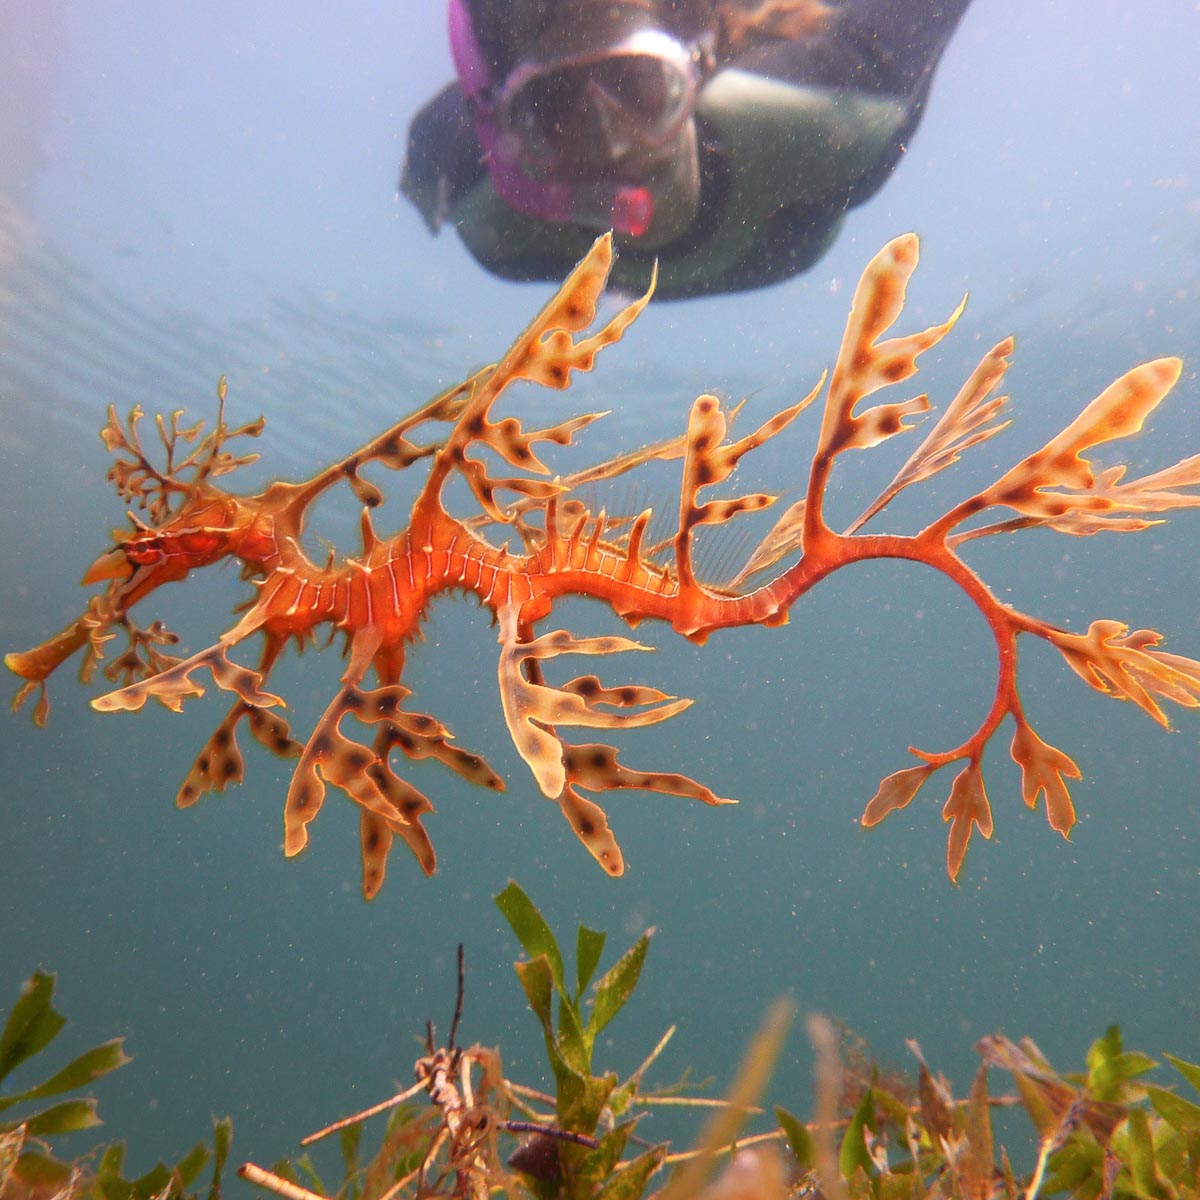 Snorkel with Seadragons to Celebrate Festival of Nature - 17th September